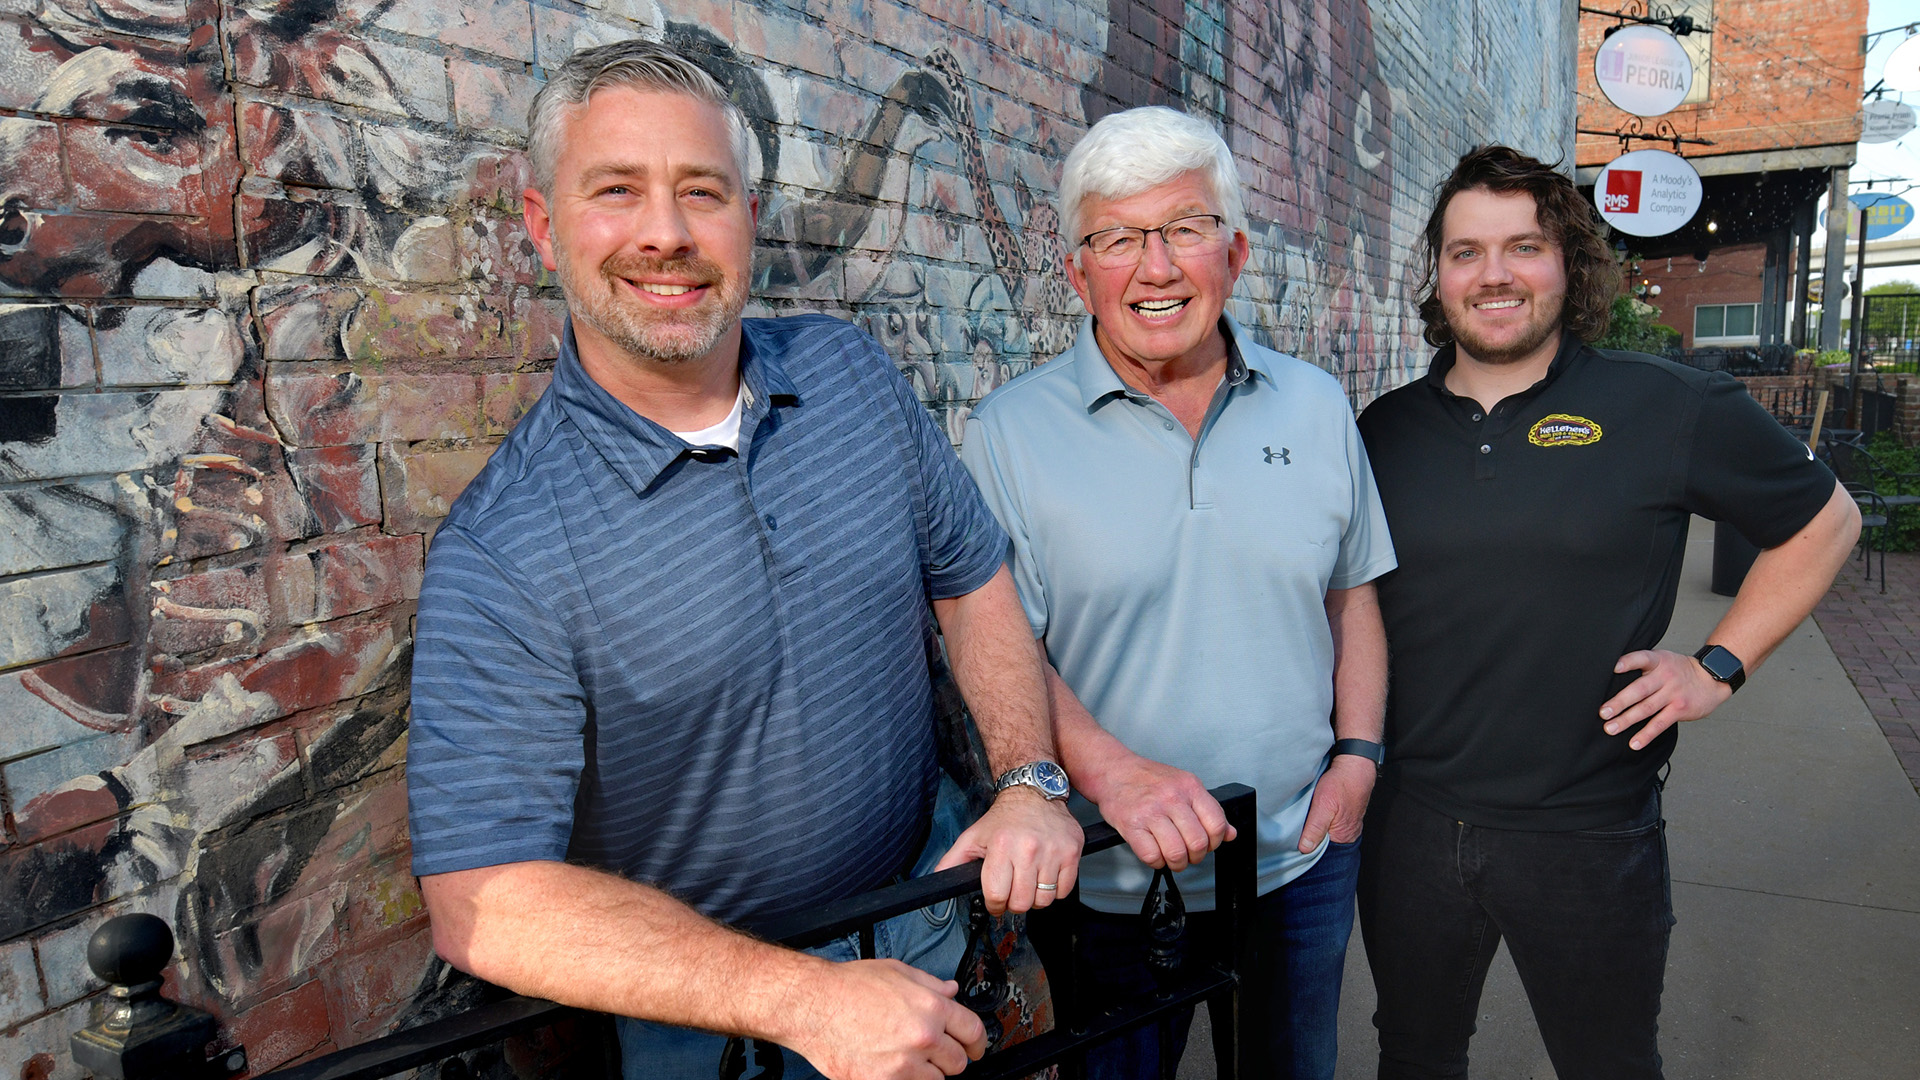 Sean Sullivan, co-owner of Kelleher’s Pub and Eatery at 619 SW Water St. with his father Pat Sullivan, and Paul Maloney, general manager of Kelleher’s, stand near the expanded venue on Water Street for summer concerts